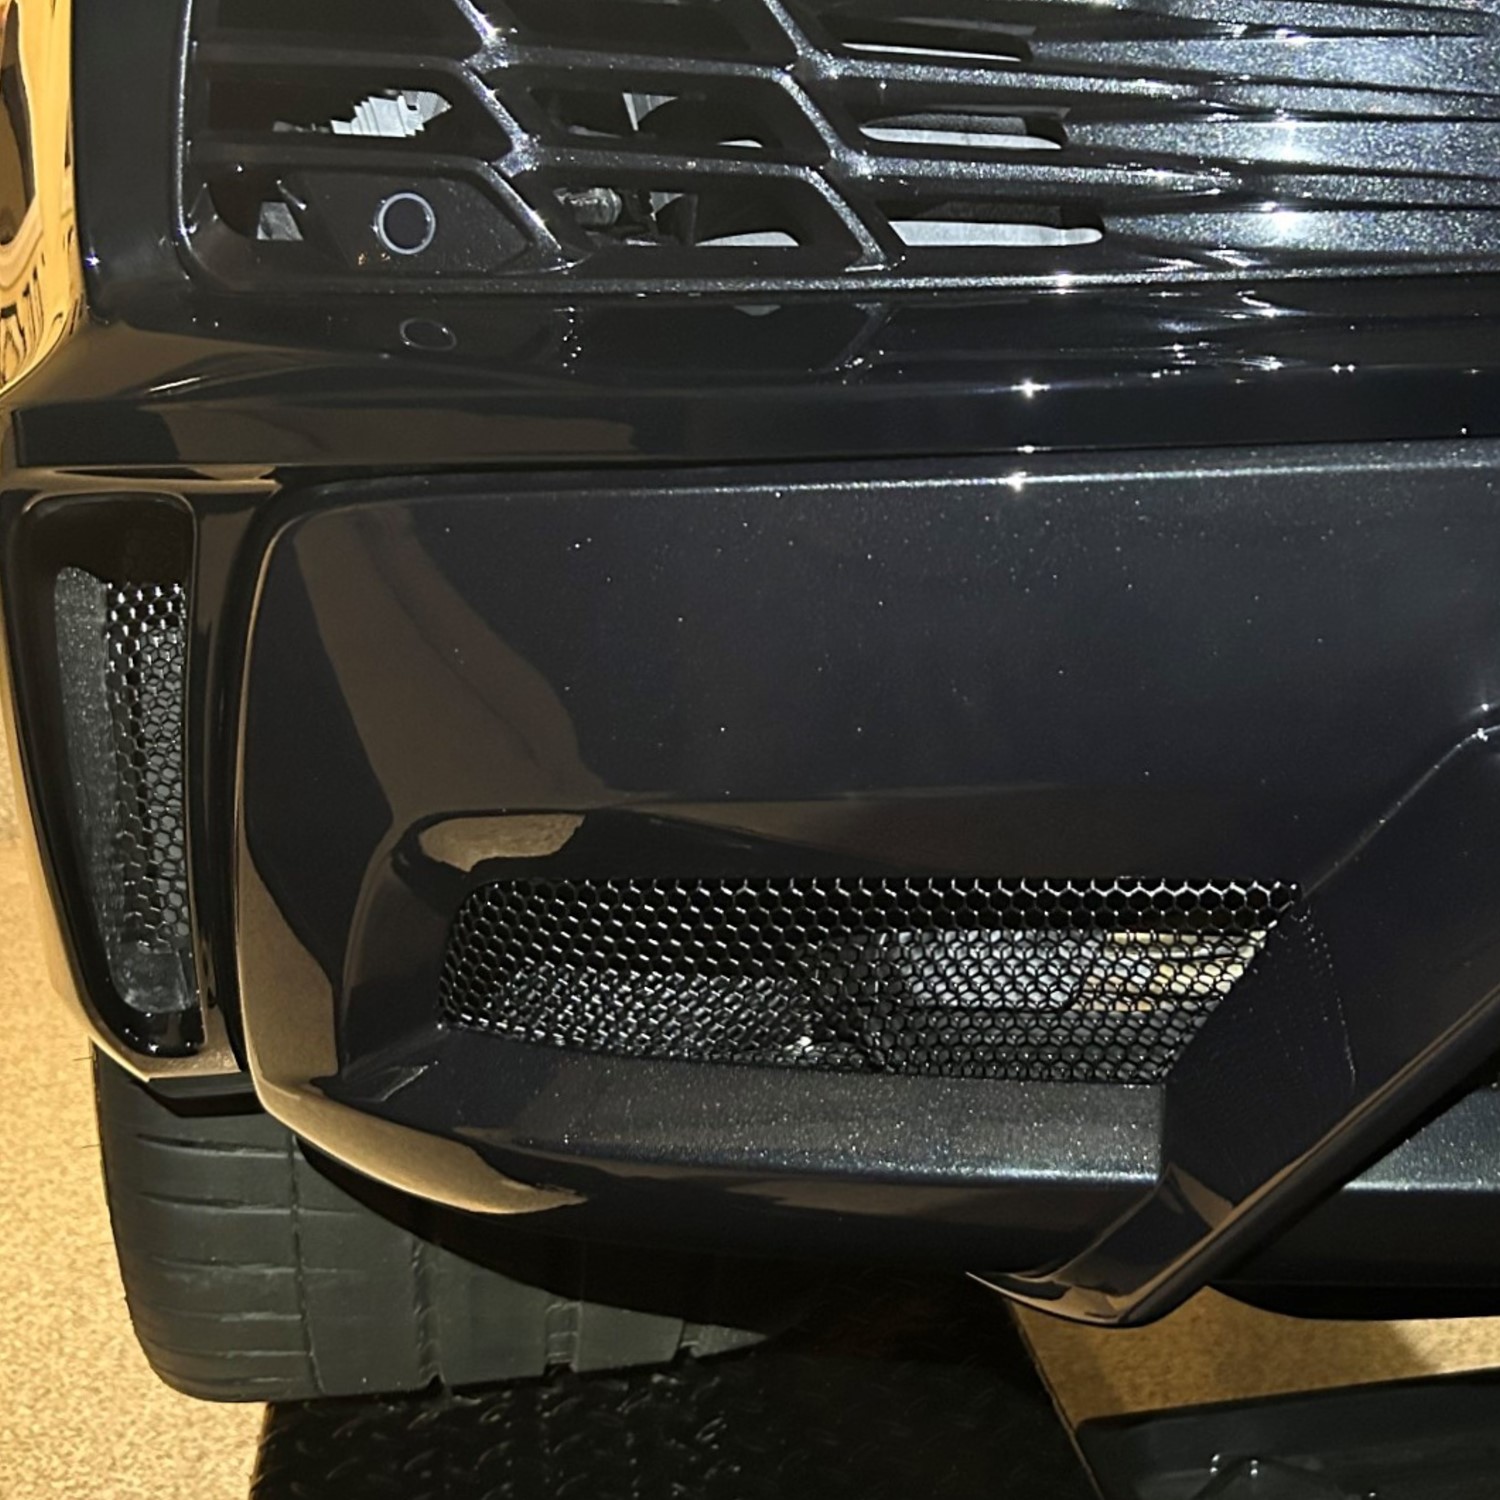 More Open Spots on the 2024+ Z06 Corvette - Rocks Coming Through the Rear Tire Bumper Openings